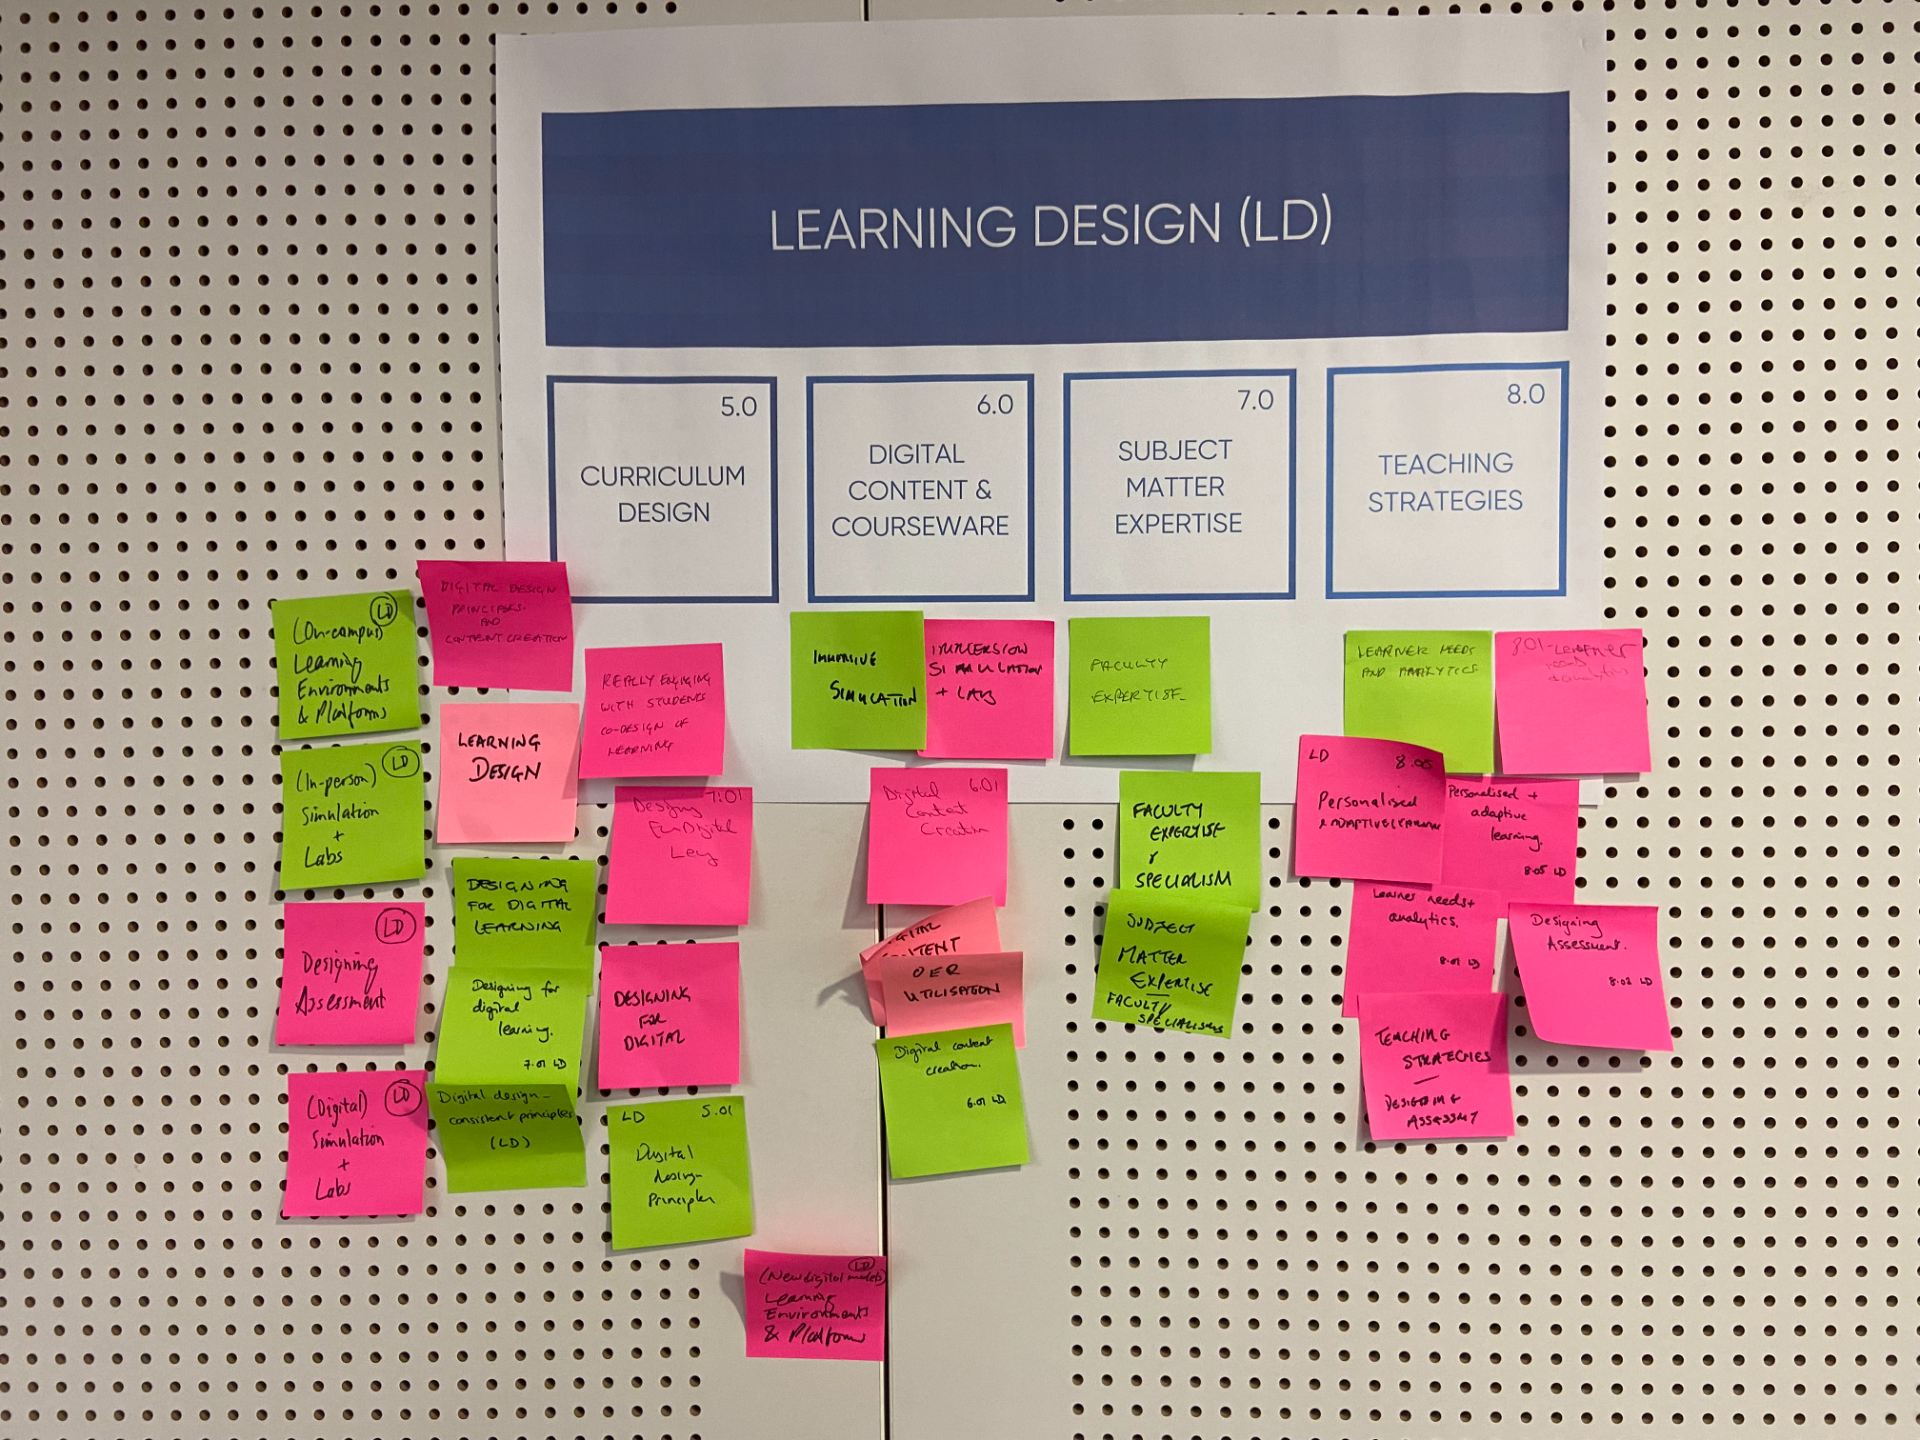 Learning Design (LD) poster with post-it notes on.